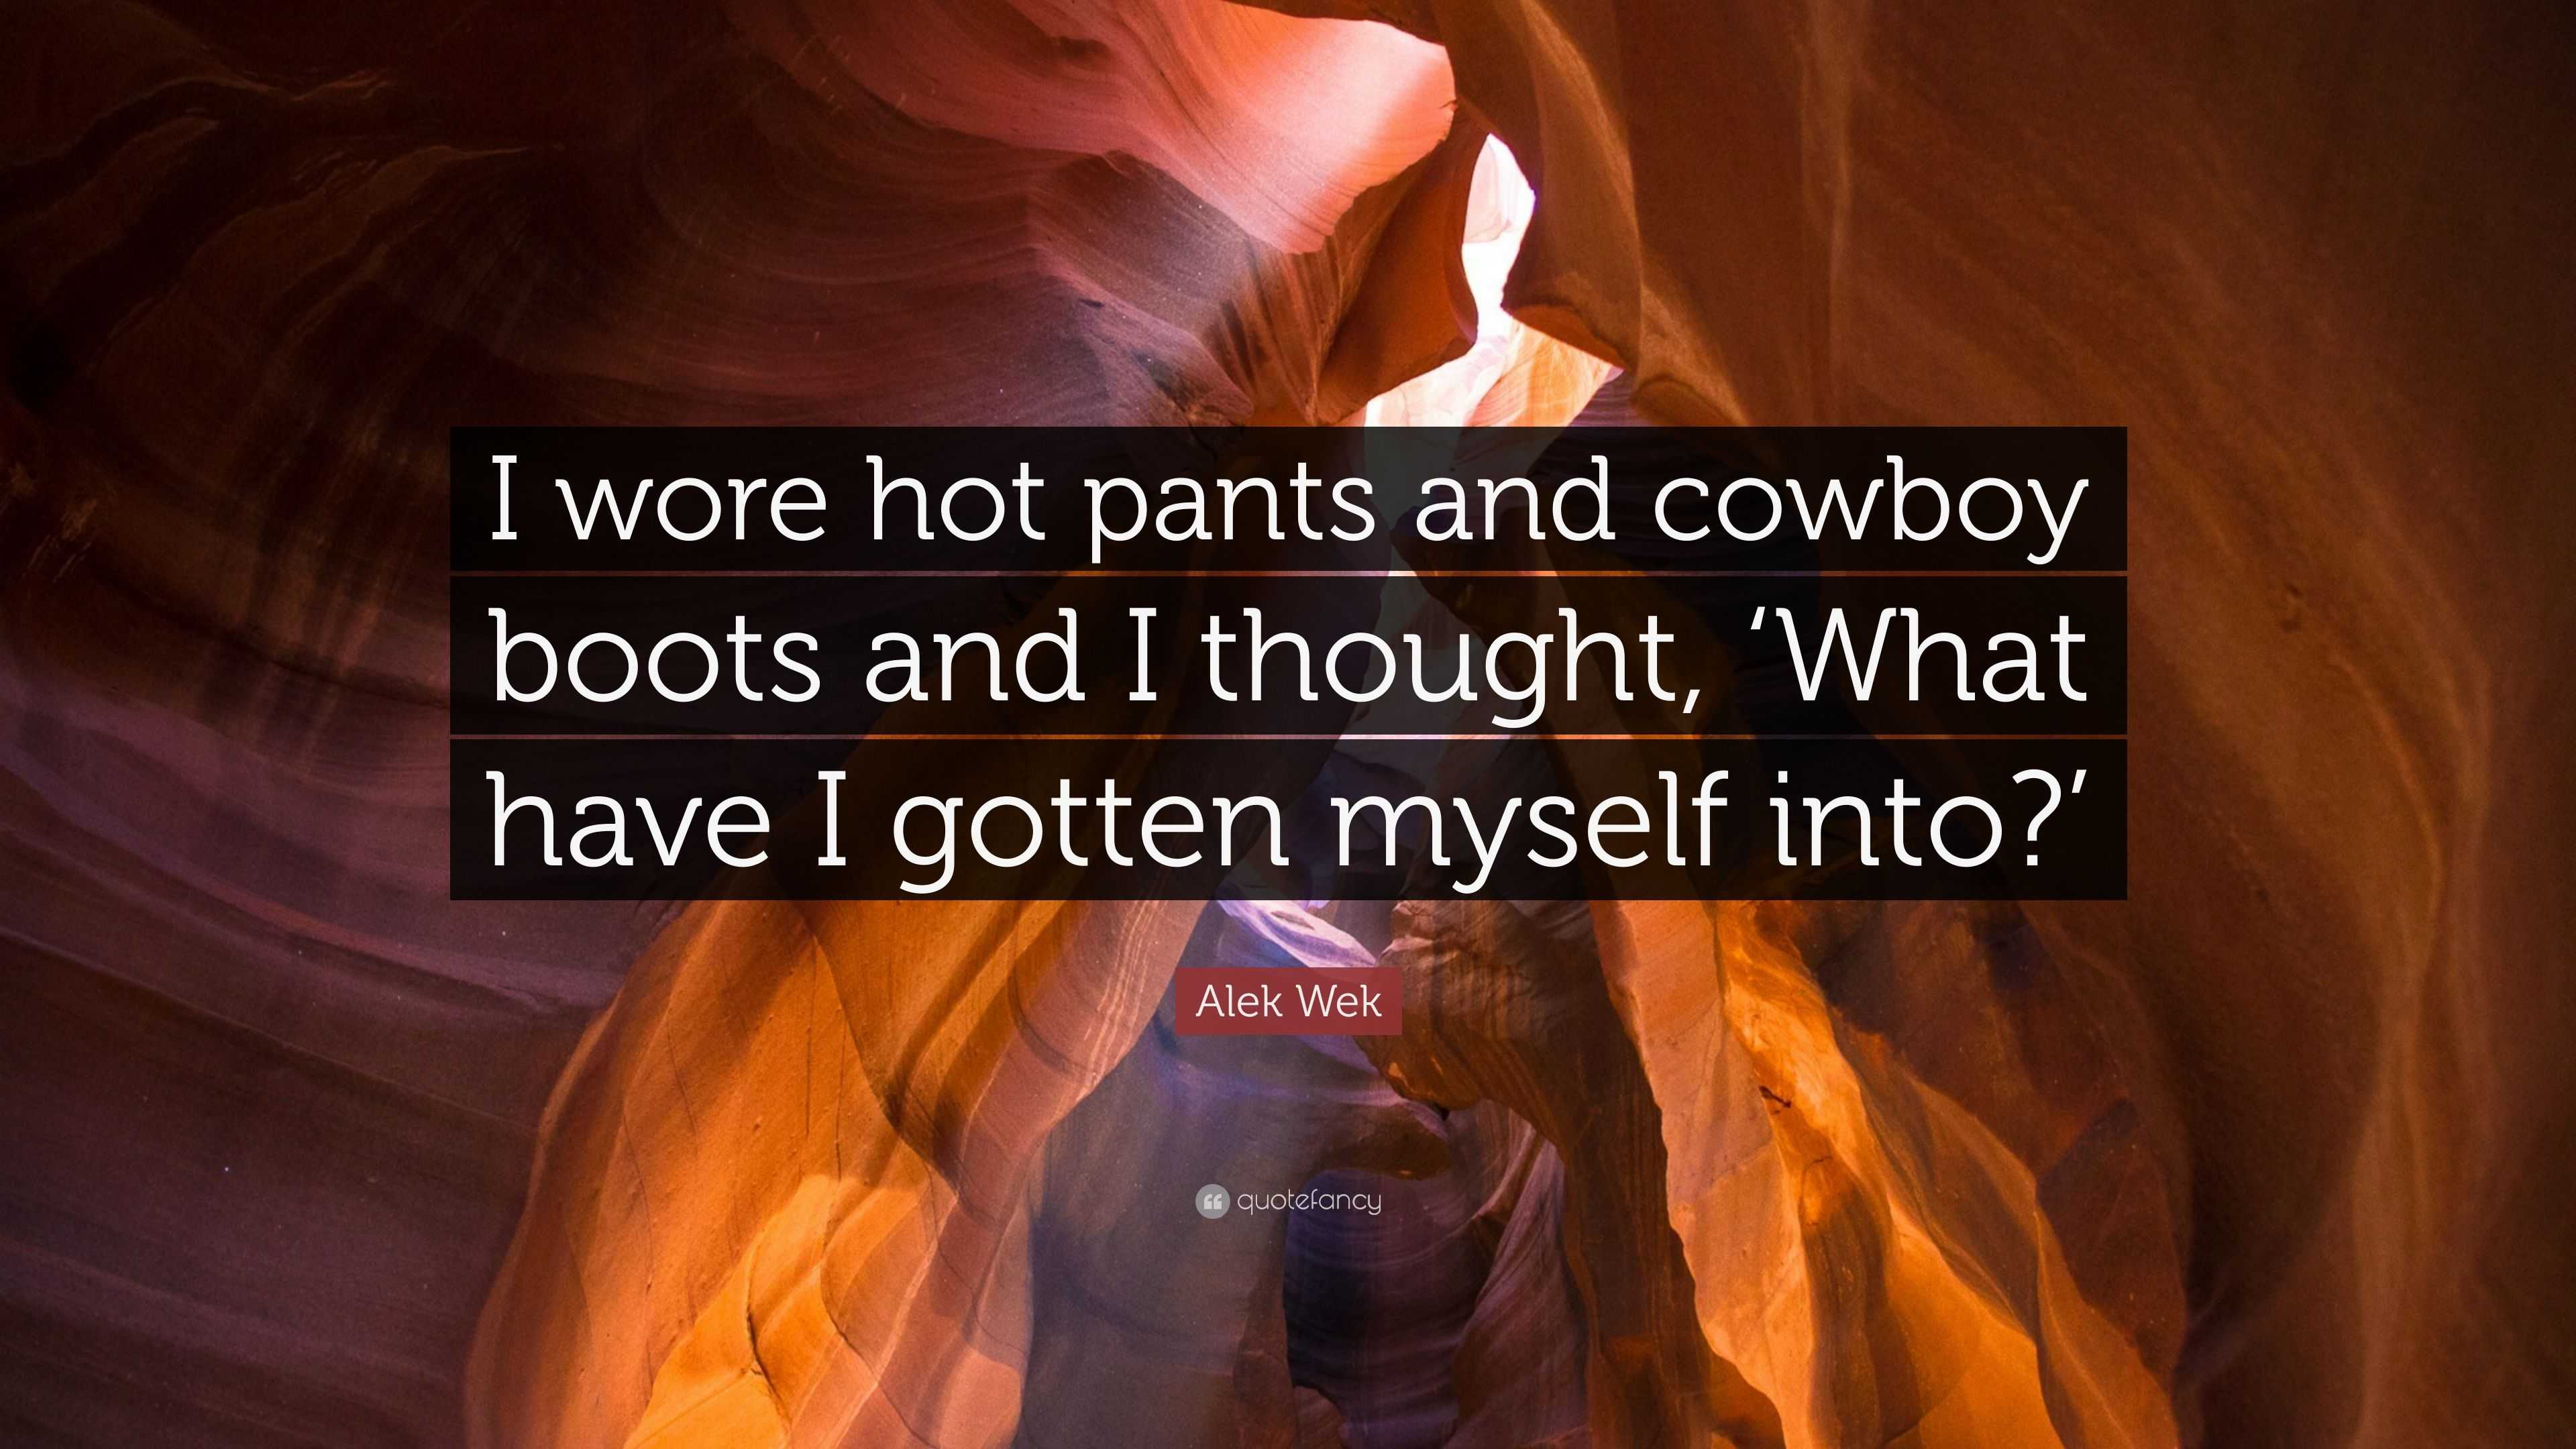 Alek Wek Quote I Wore Hot Pants And Cowboy Boots And I Thought Images, Photos, Reviews